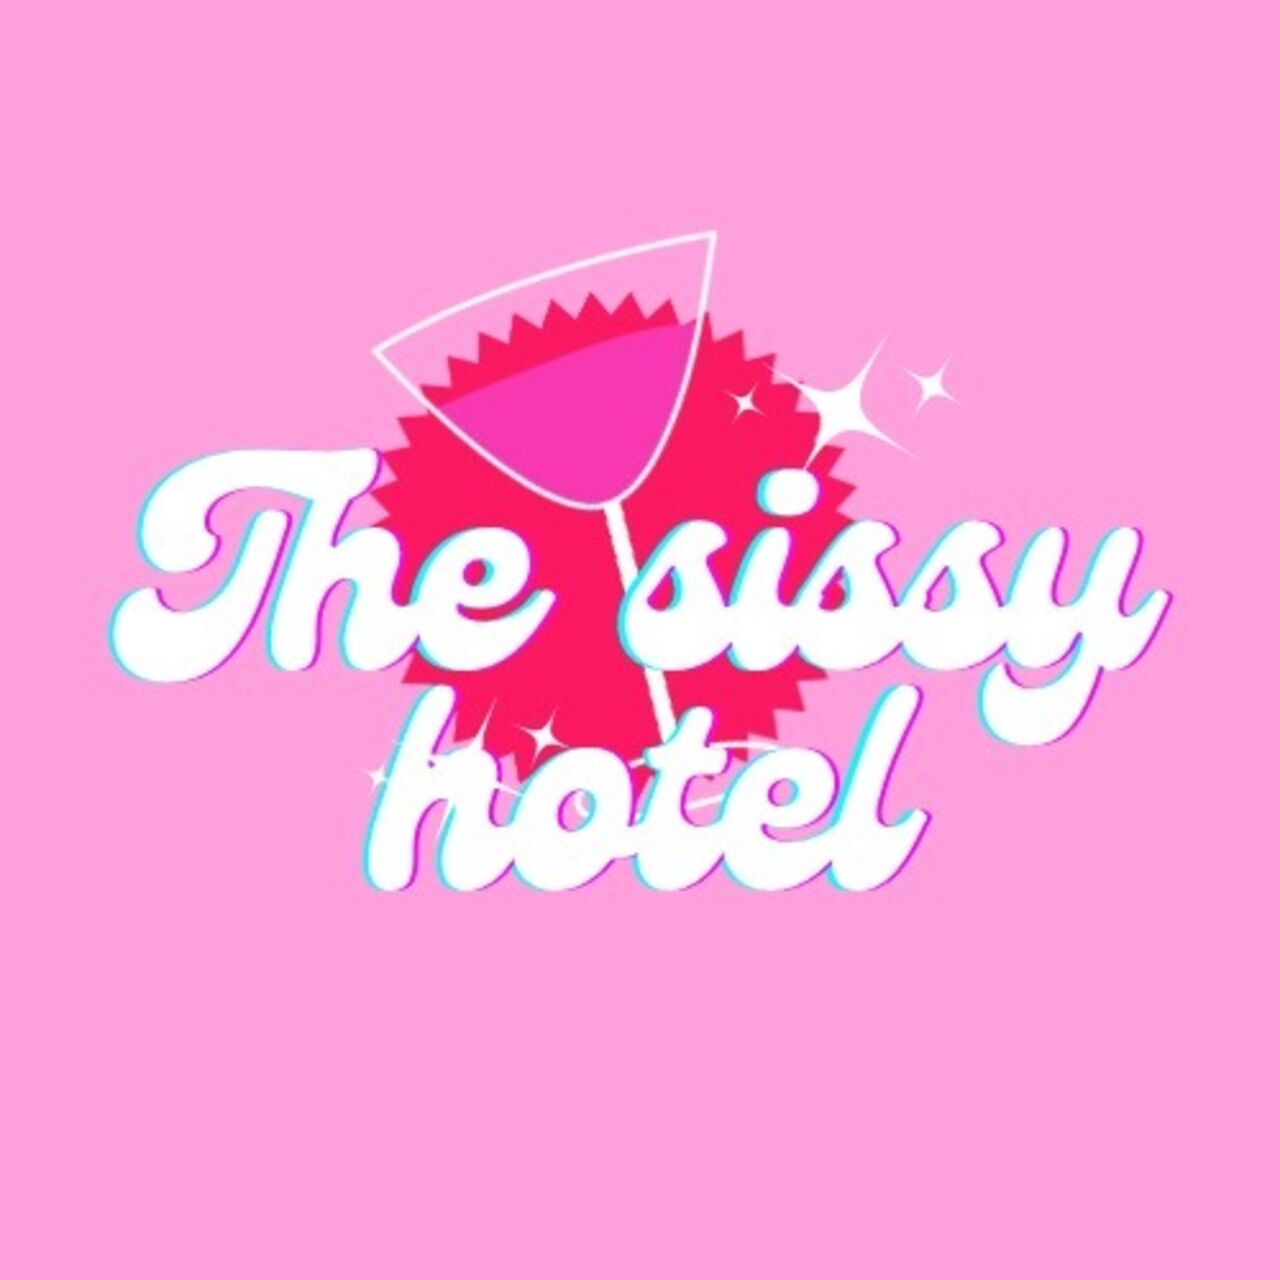 See THE SISSY HOTEL 🏨 🌸 profile